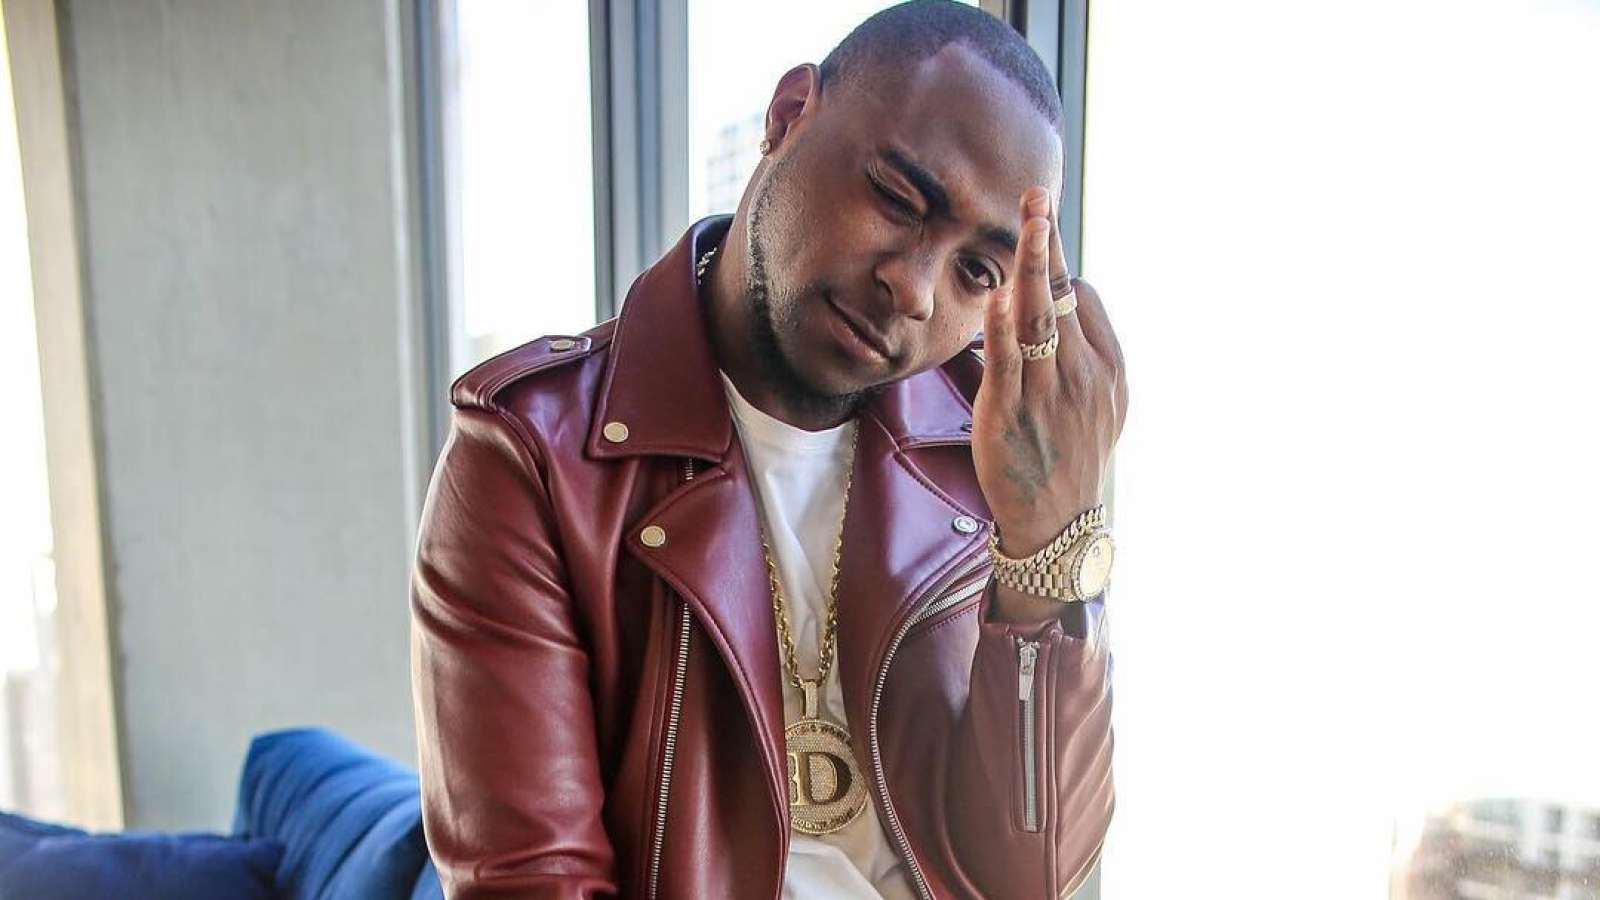 Davido's 2nd Baby Mama Shares Adorable Photo Of Their Baby Chilling